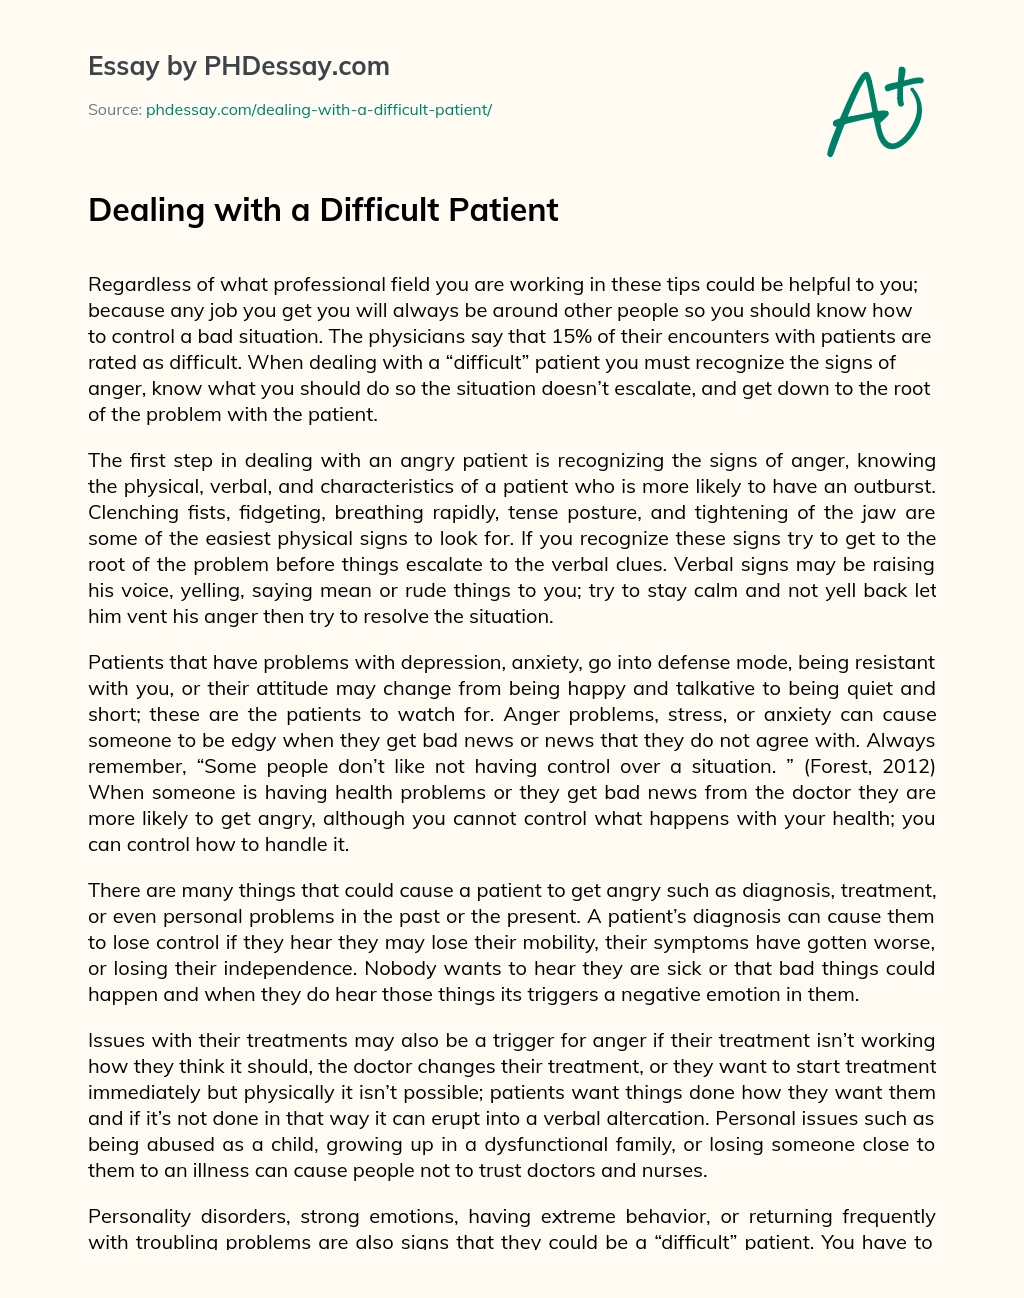 Dealing with a Difficult Patient essay